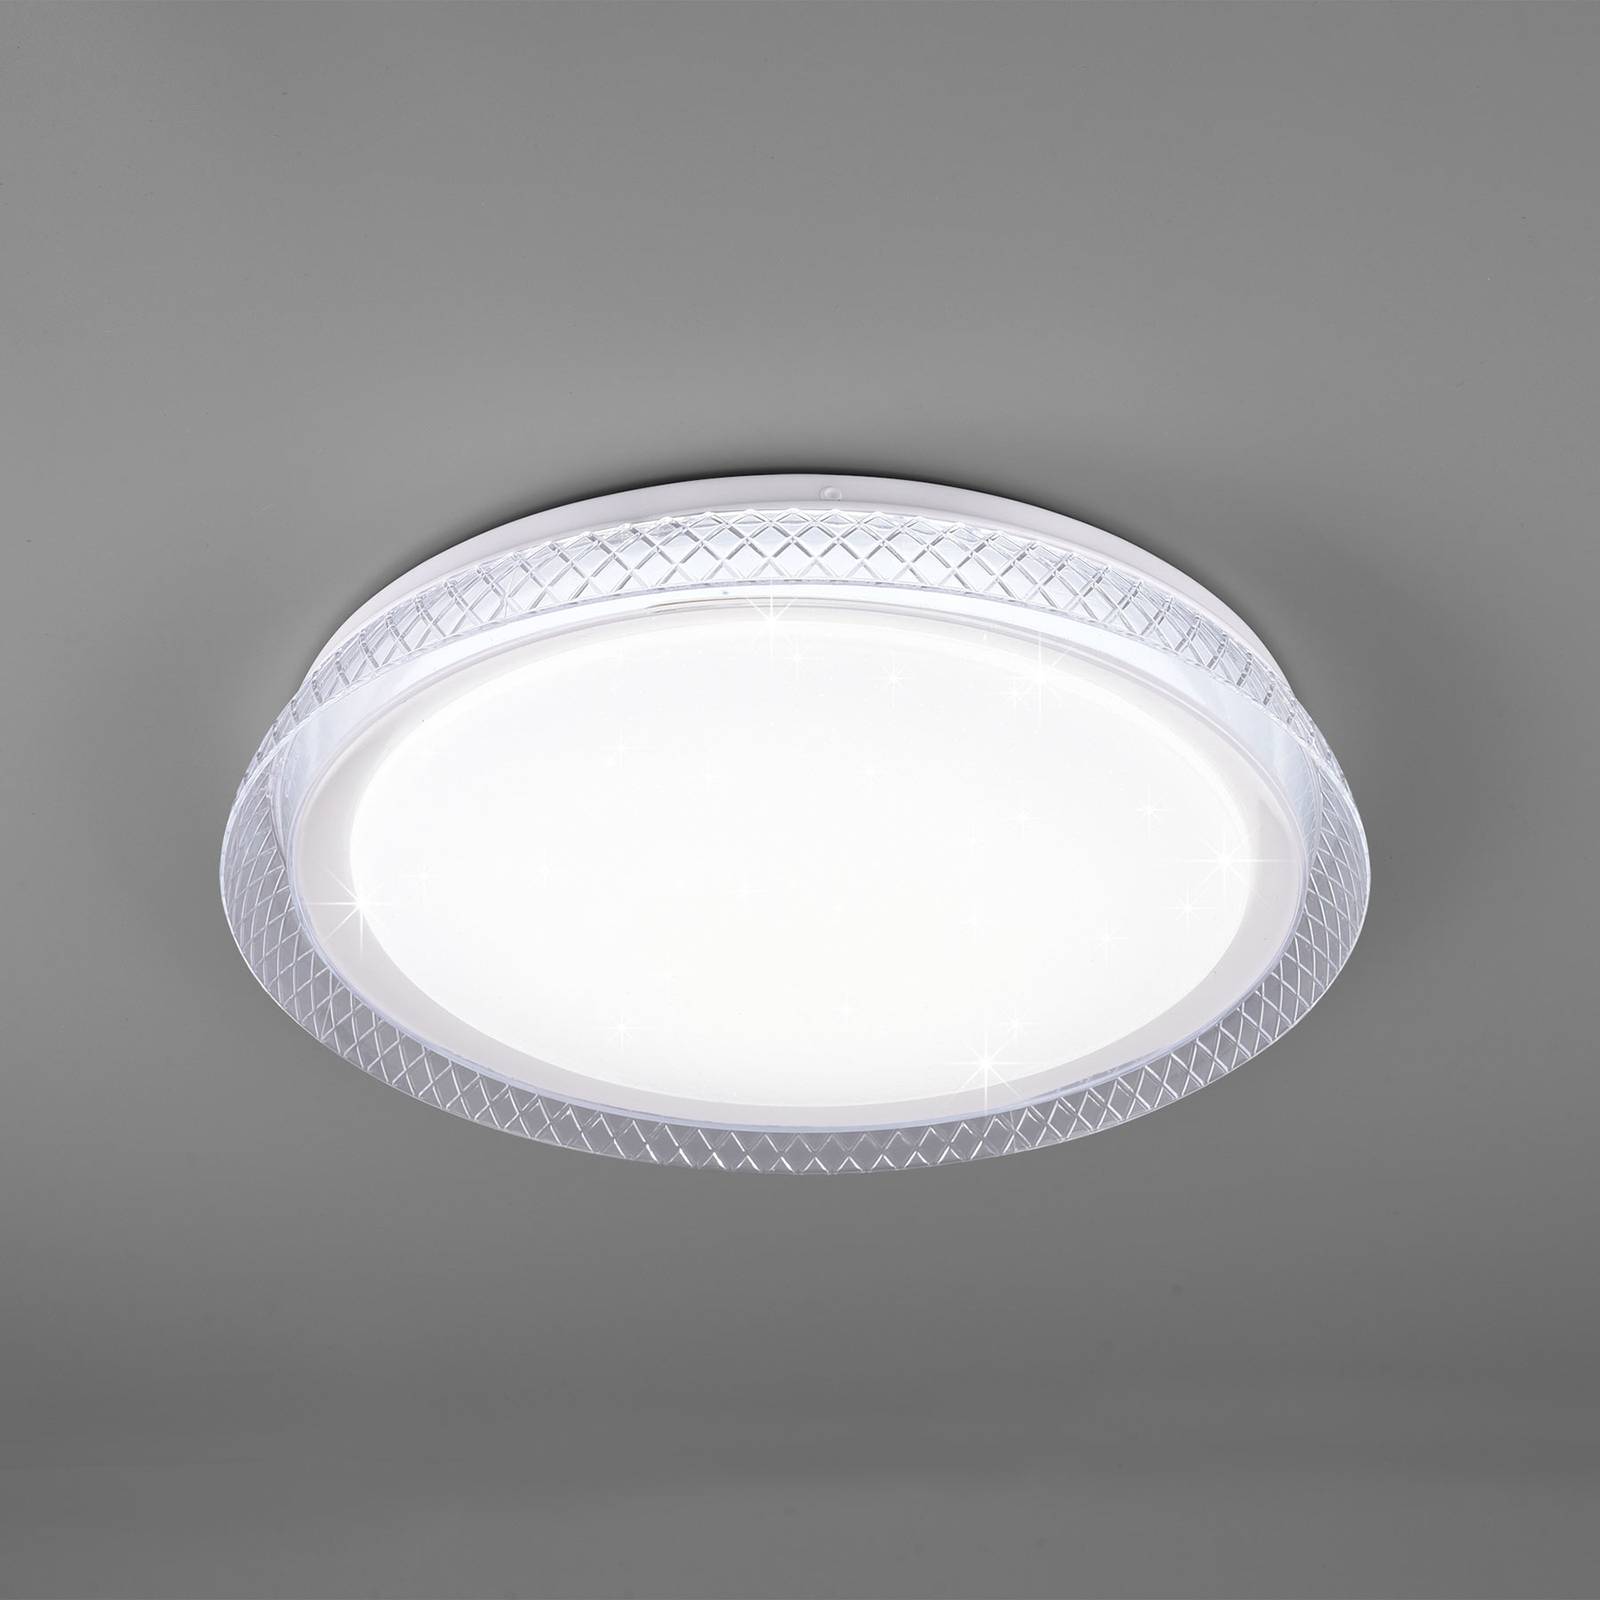 LED-Deckenleuchte Heracles, tunable white, Ø 38 cm